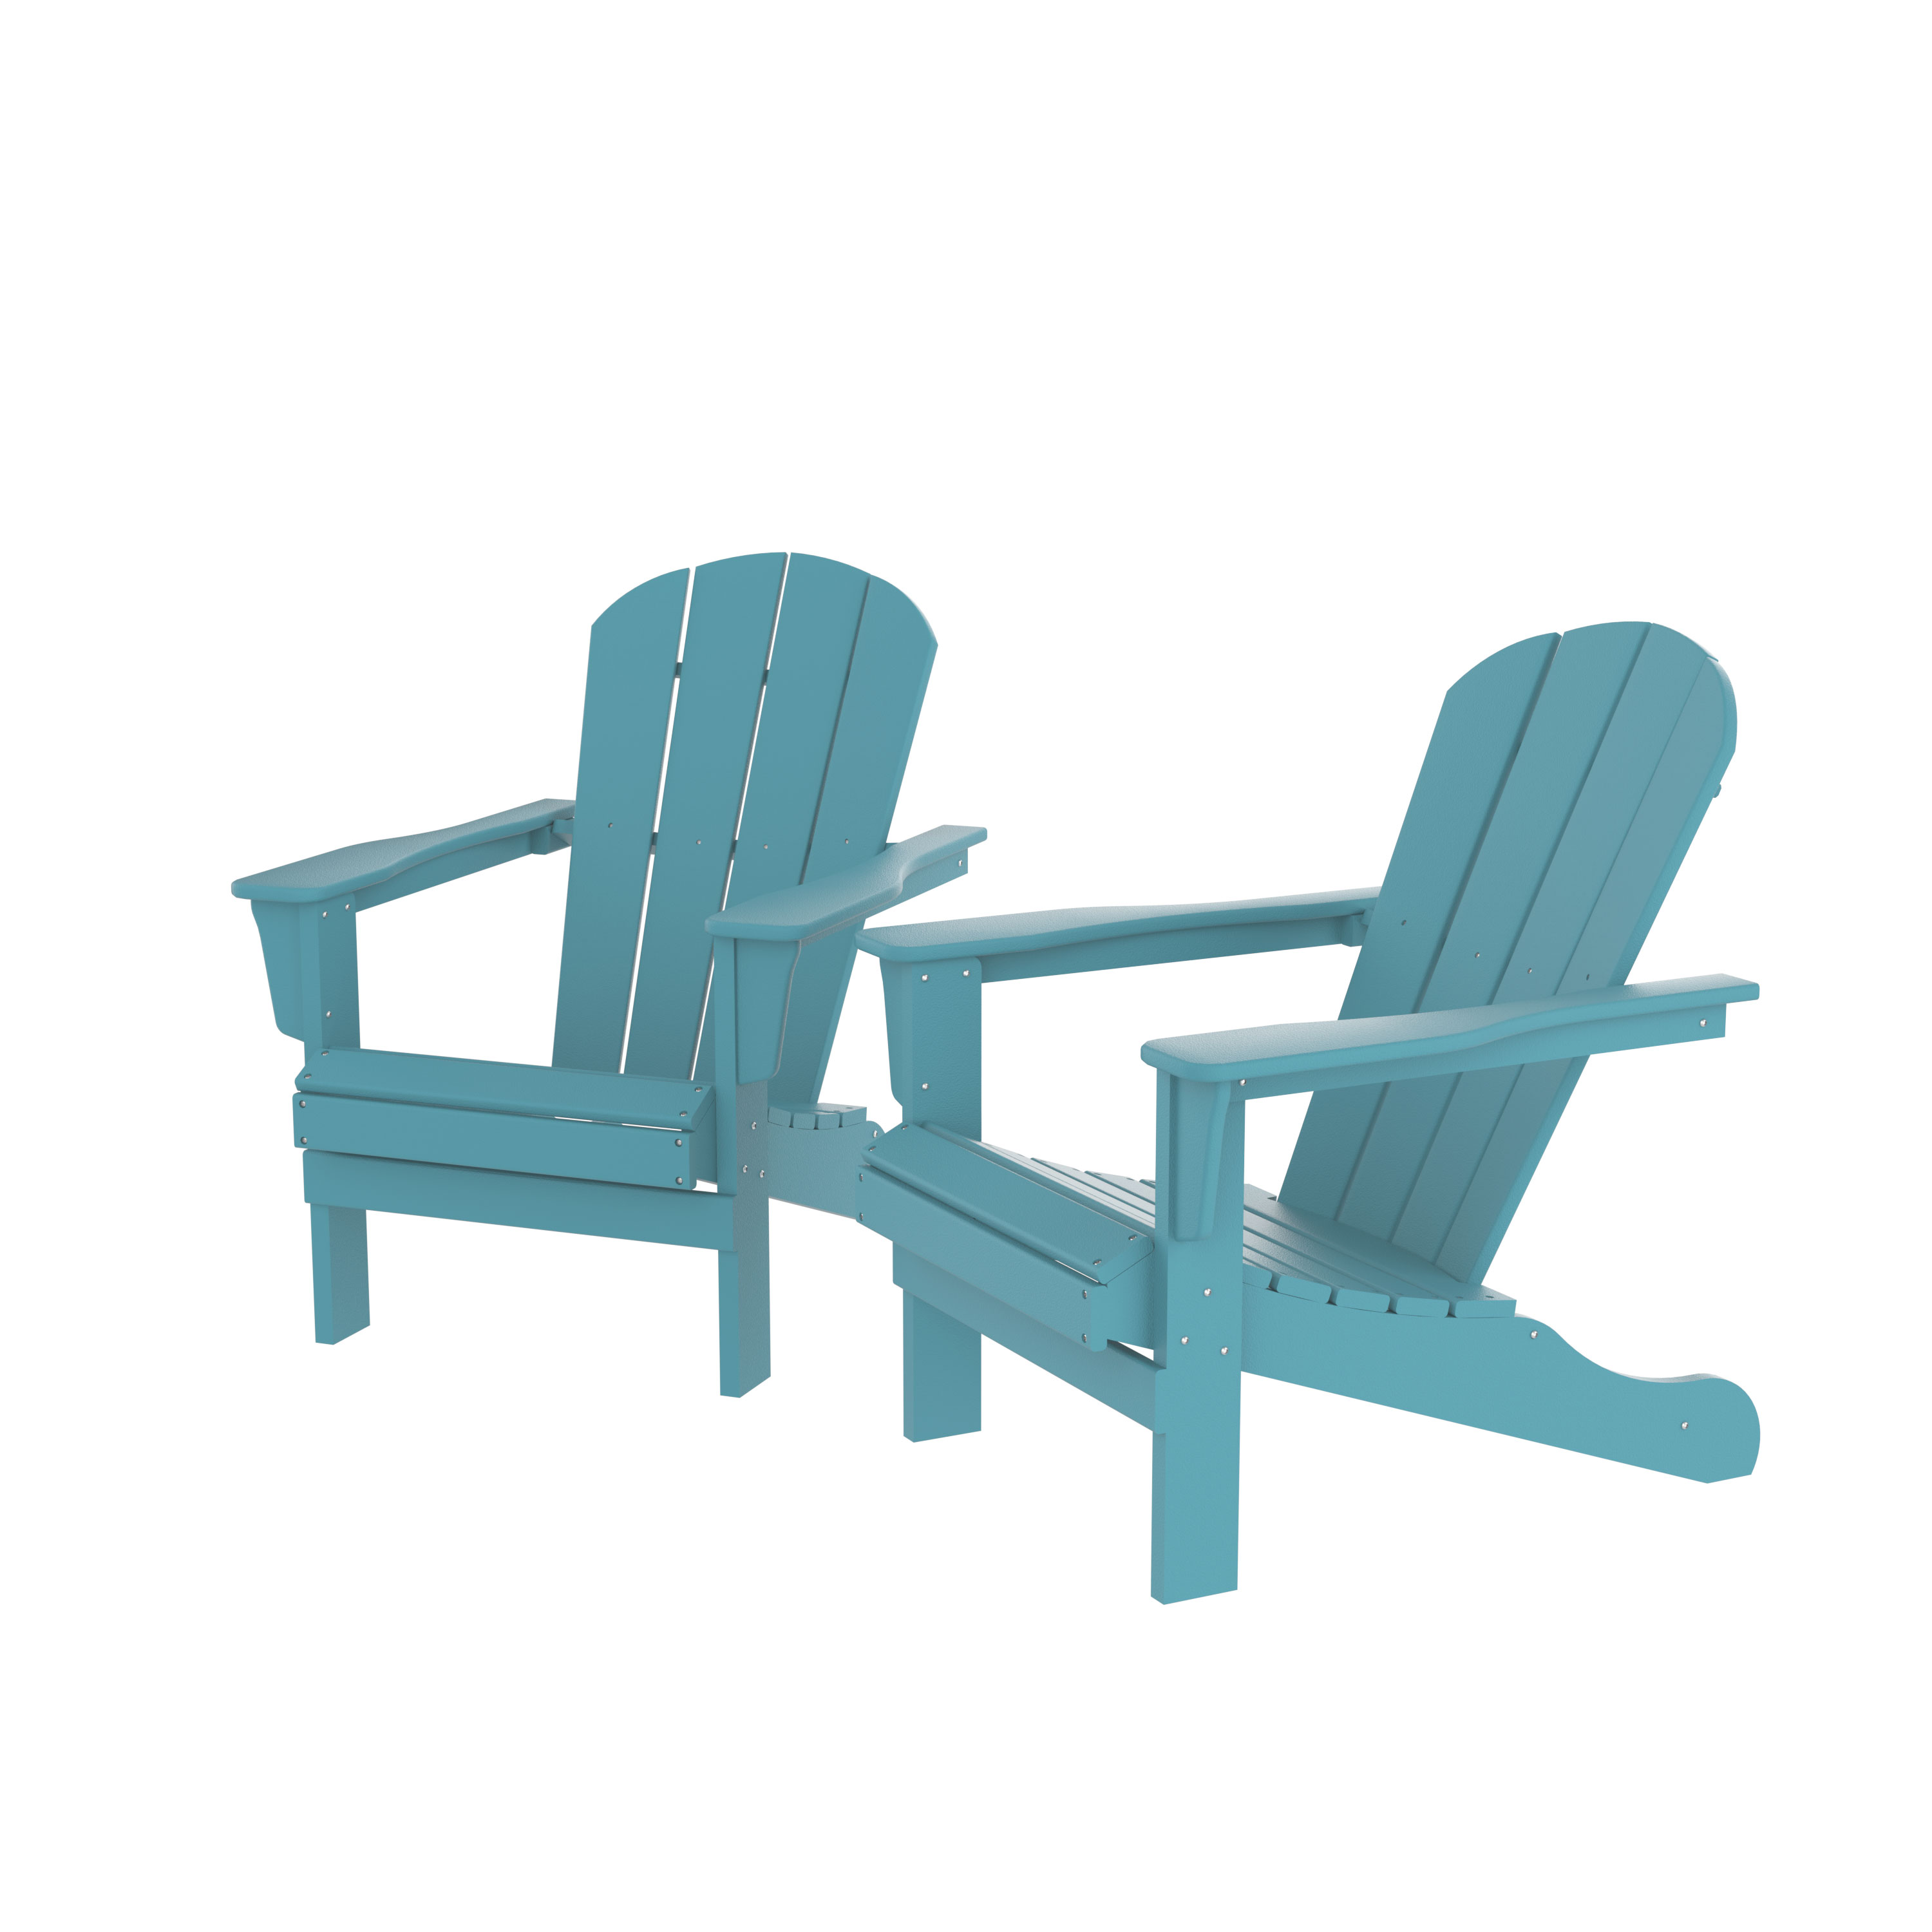 Clearance! HDPE Adirondack Chair, Fire Pit Chairs, Sand Chair, Patio Outdoor Chairs,DPE Plastic Resin Deck Chair, lawn chairs, Adult Size ,Weather Resistant for Patio/ Backyard/Garden ,Set of 2 - image 3 of 6